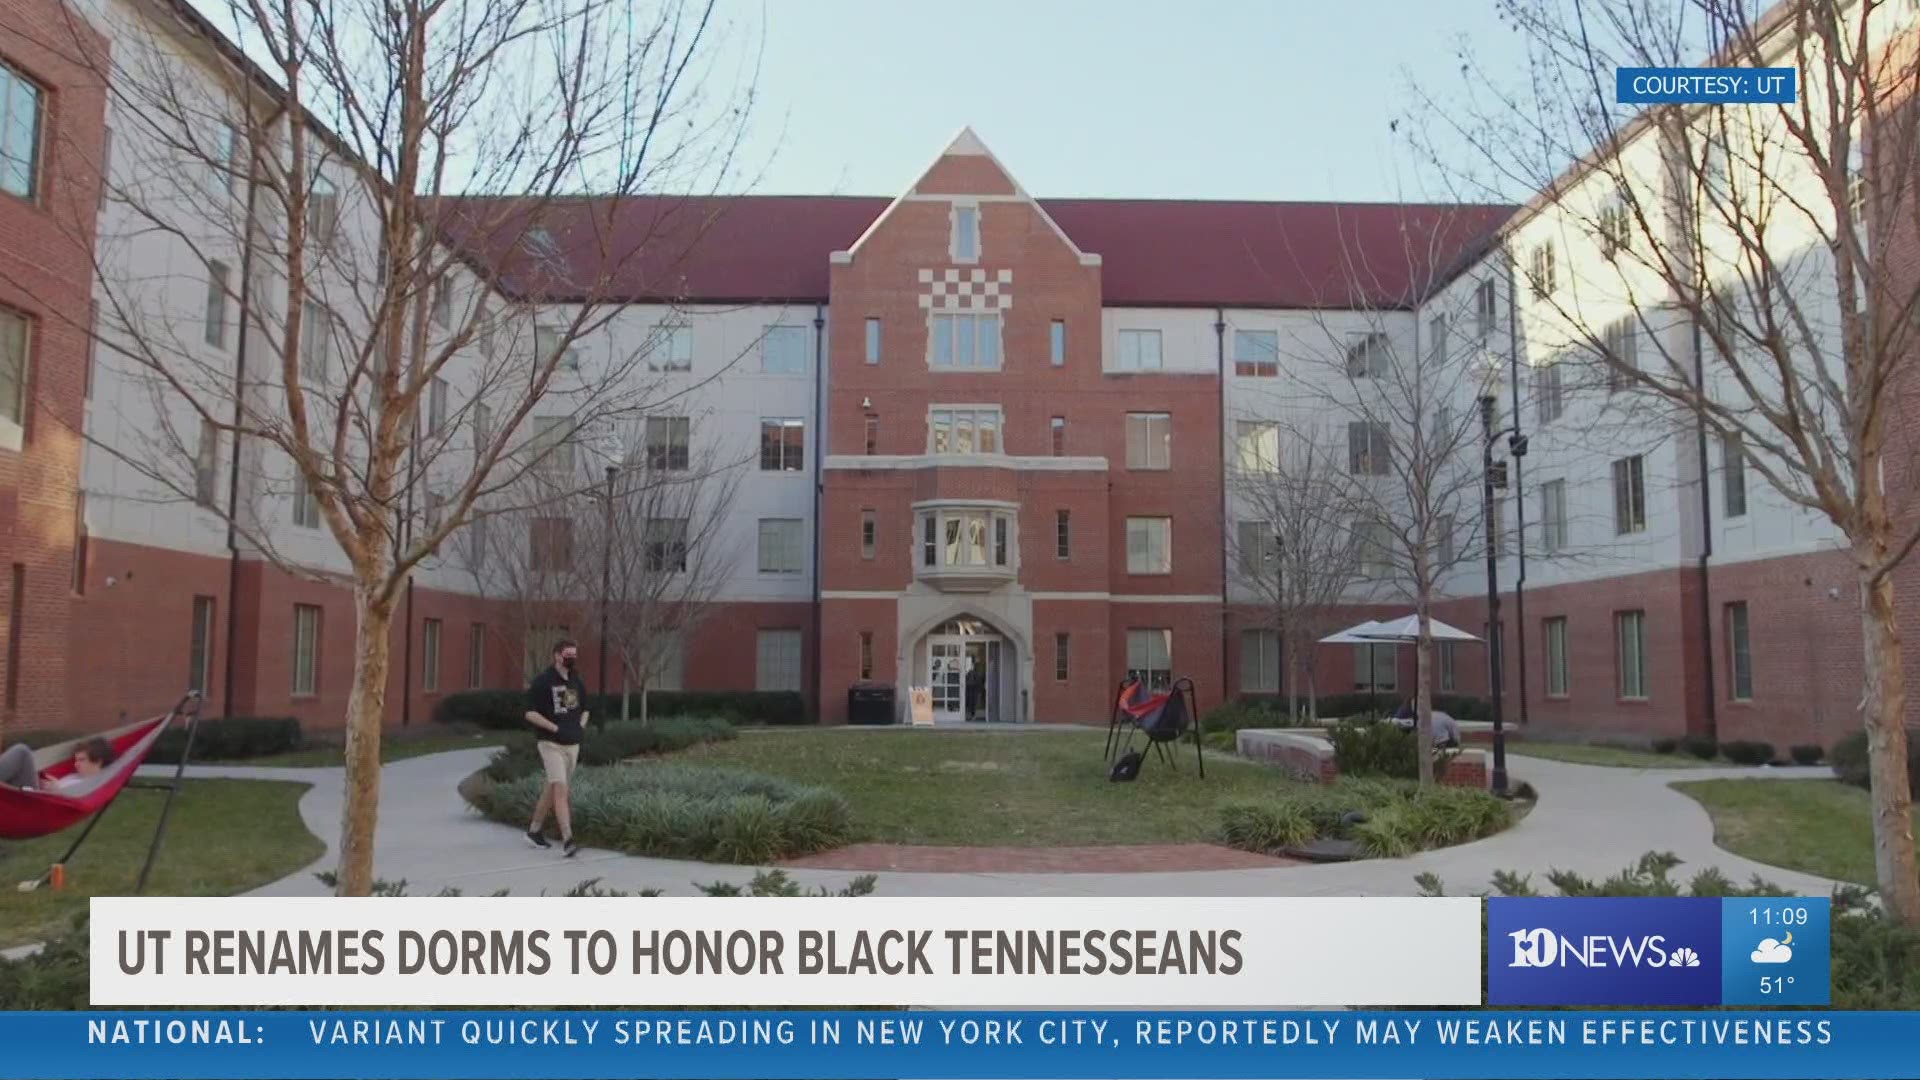 The University of Tennessee is renaming two residence halls to honor Theotis Robinson Jr. and Rita Sanders Geier.